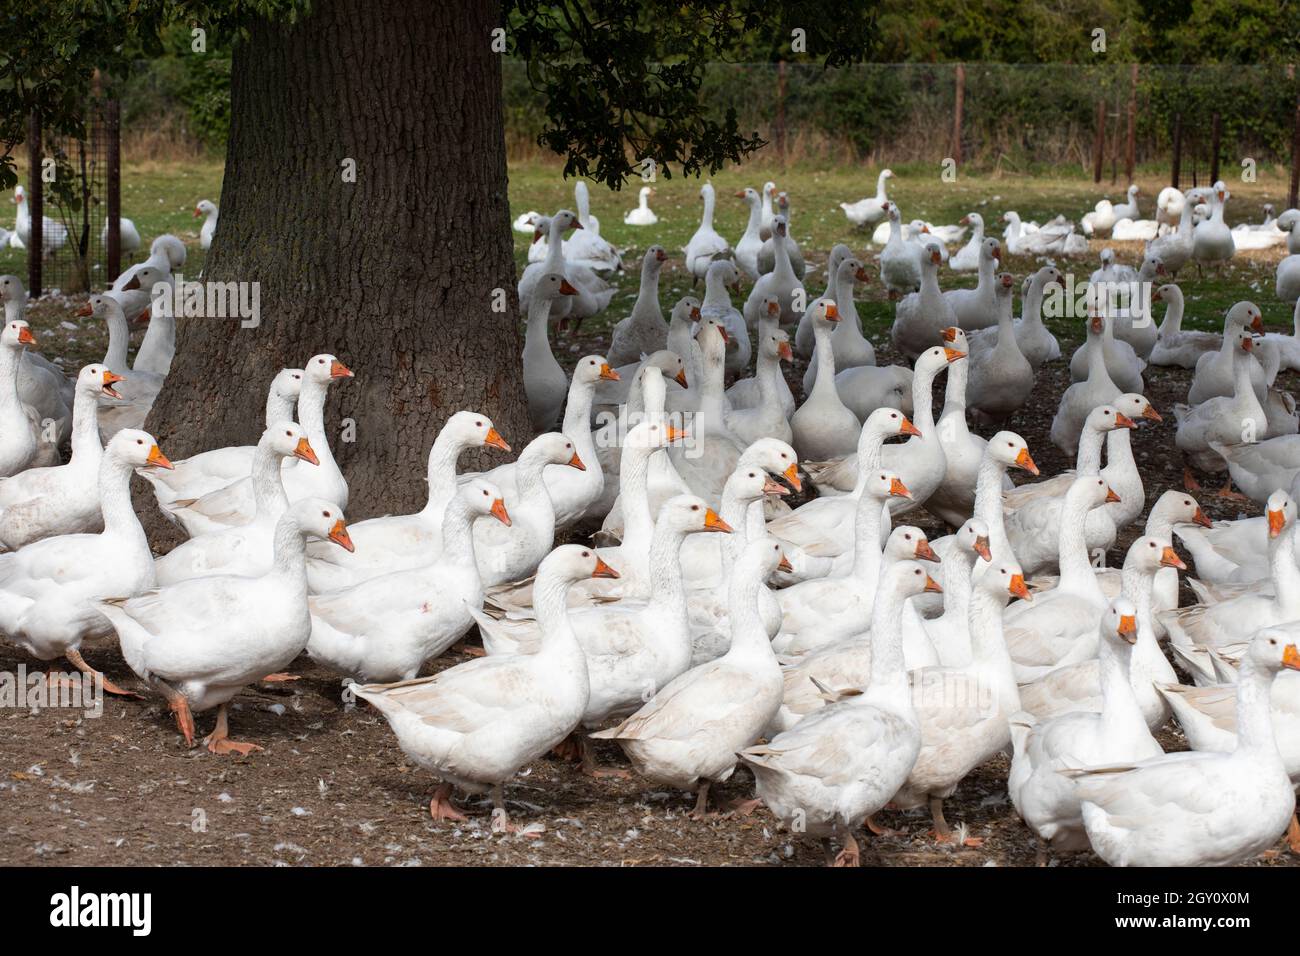 Geese roaming on a farm n Warwickshire, UK. They are being reared for the Christmas market. Stock Photo